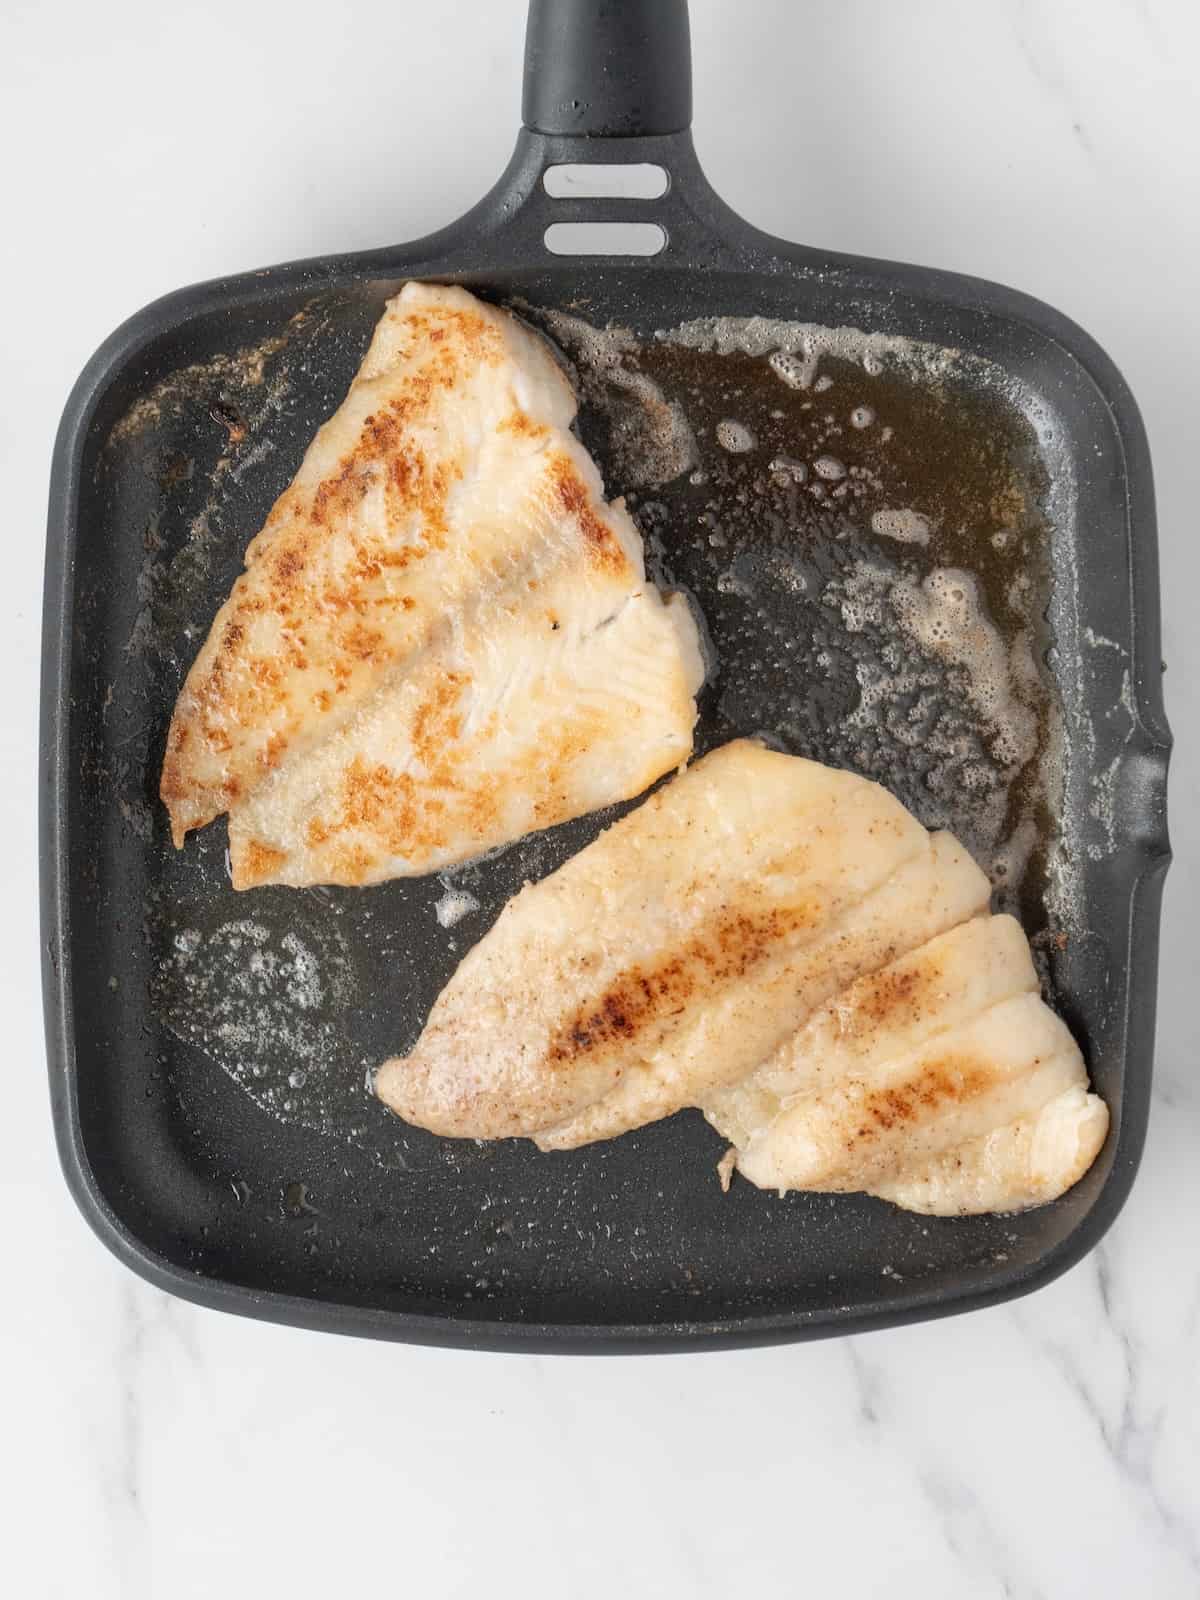 Learn How to Pan-Fry Fish Fillets